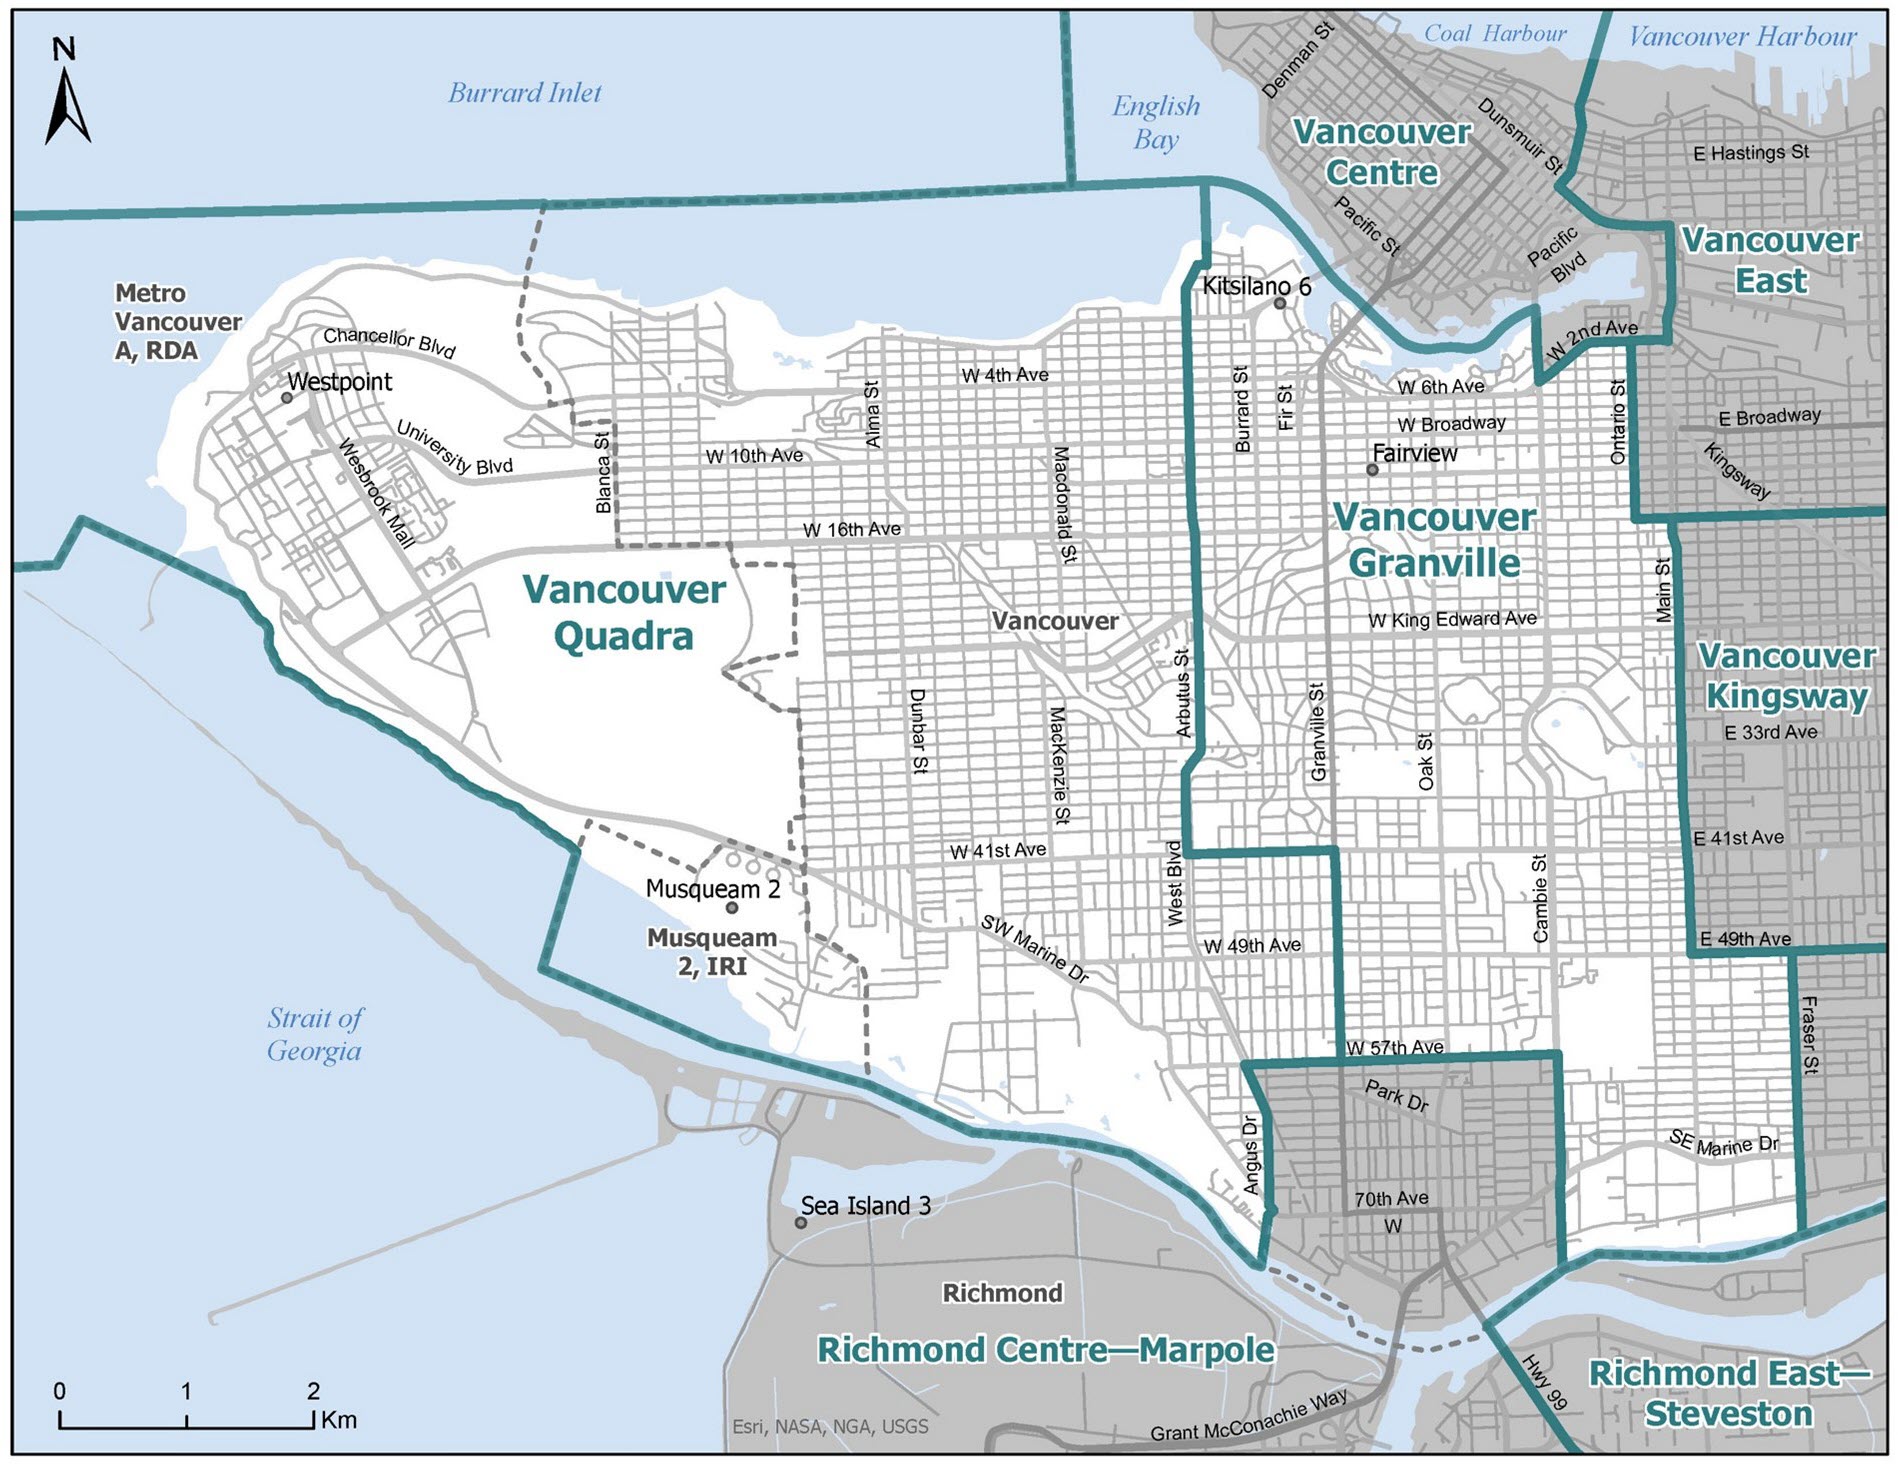 Boundaries of Vancouver Quadra and Vancouver Granville